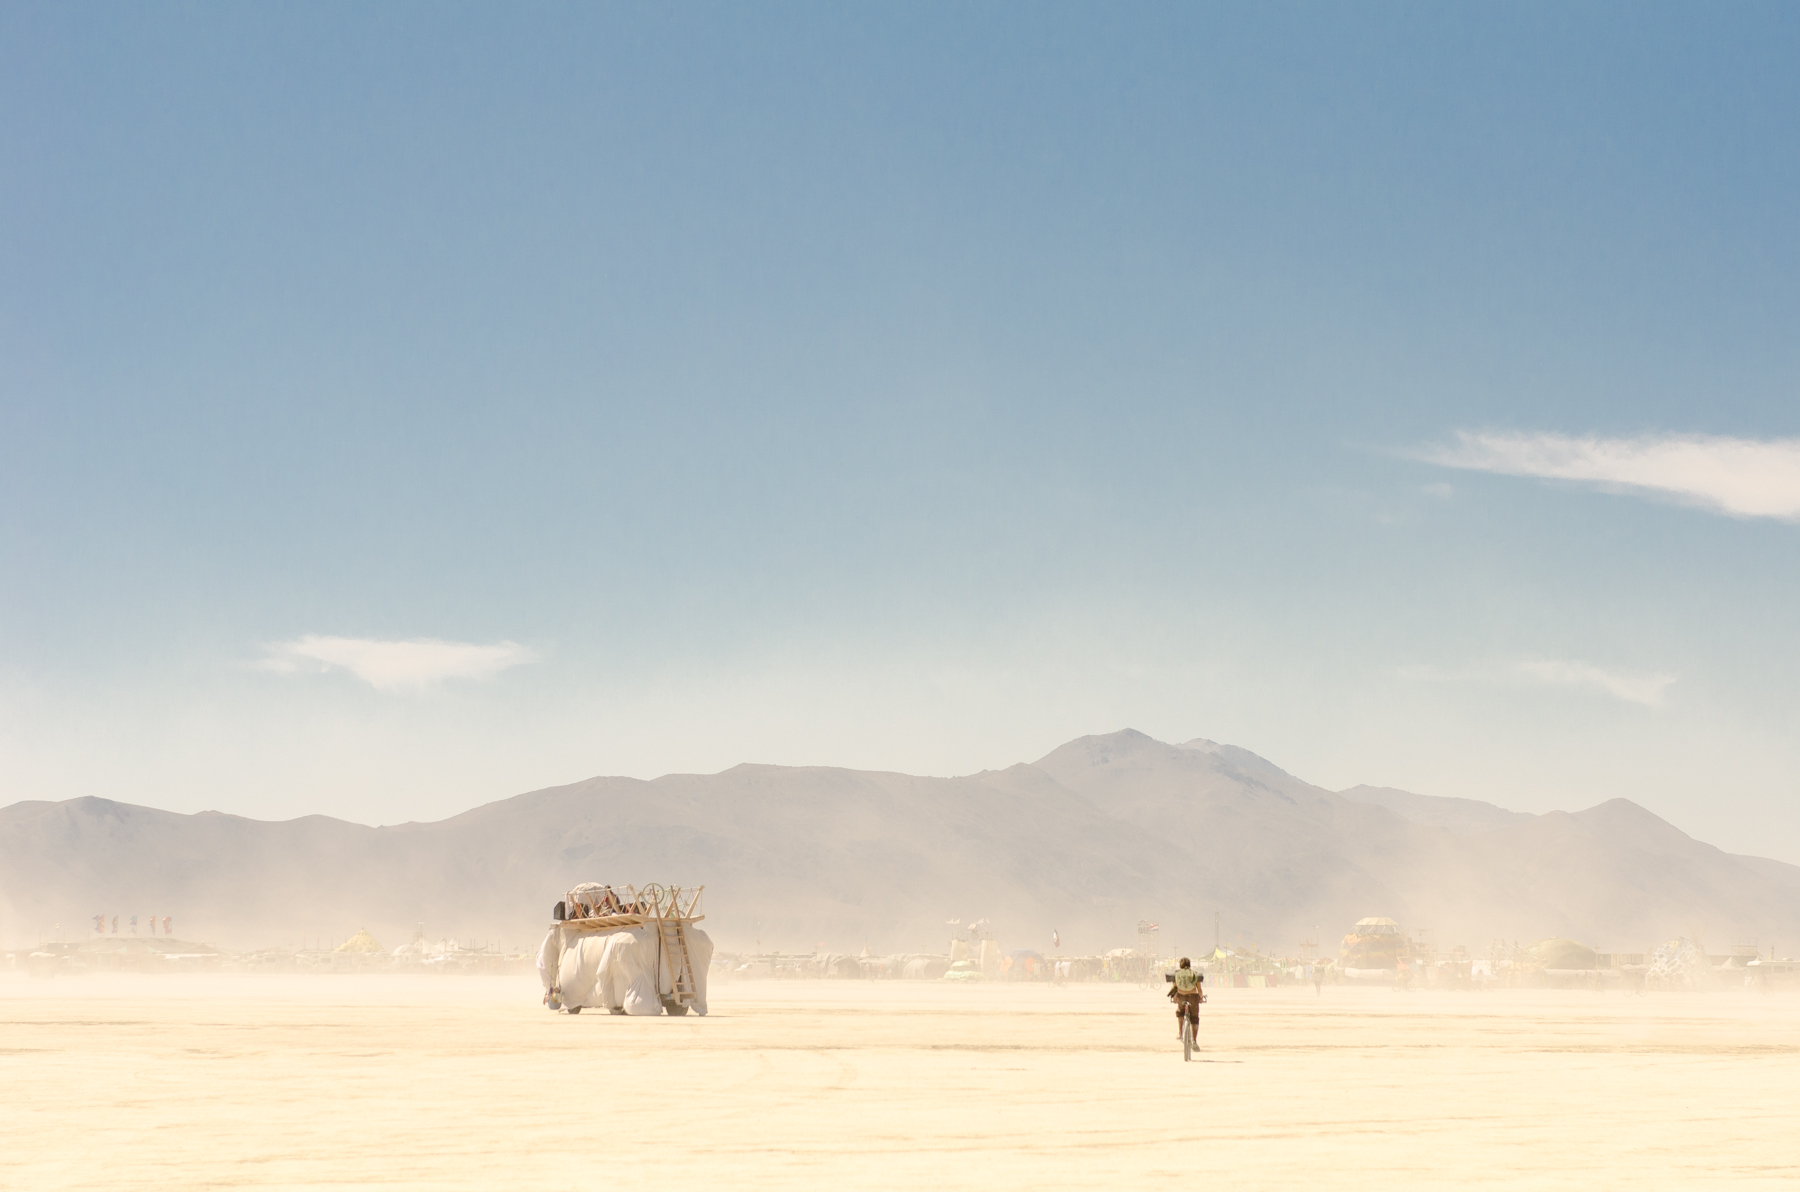 Dust storms at Burning Man are beautiful but painful on the eyes and the camera lenses.